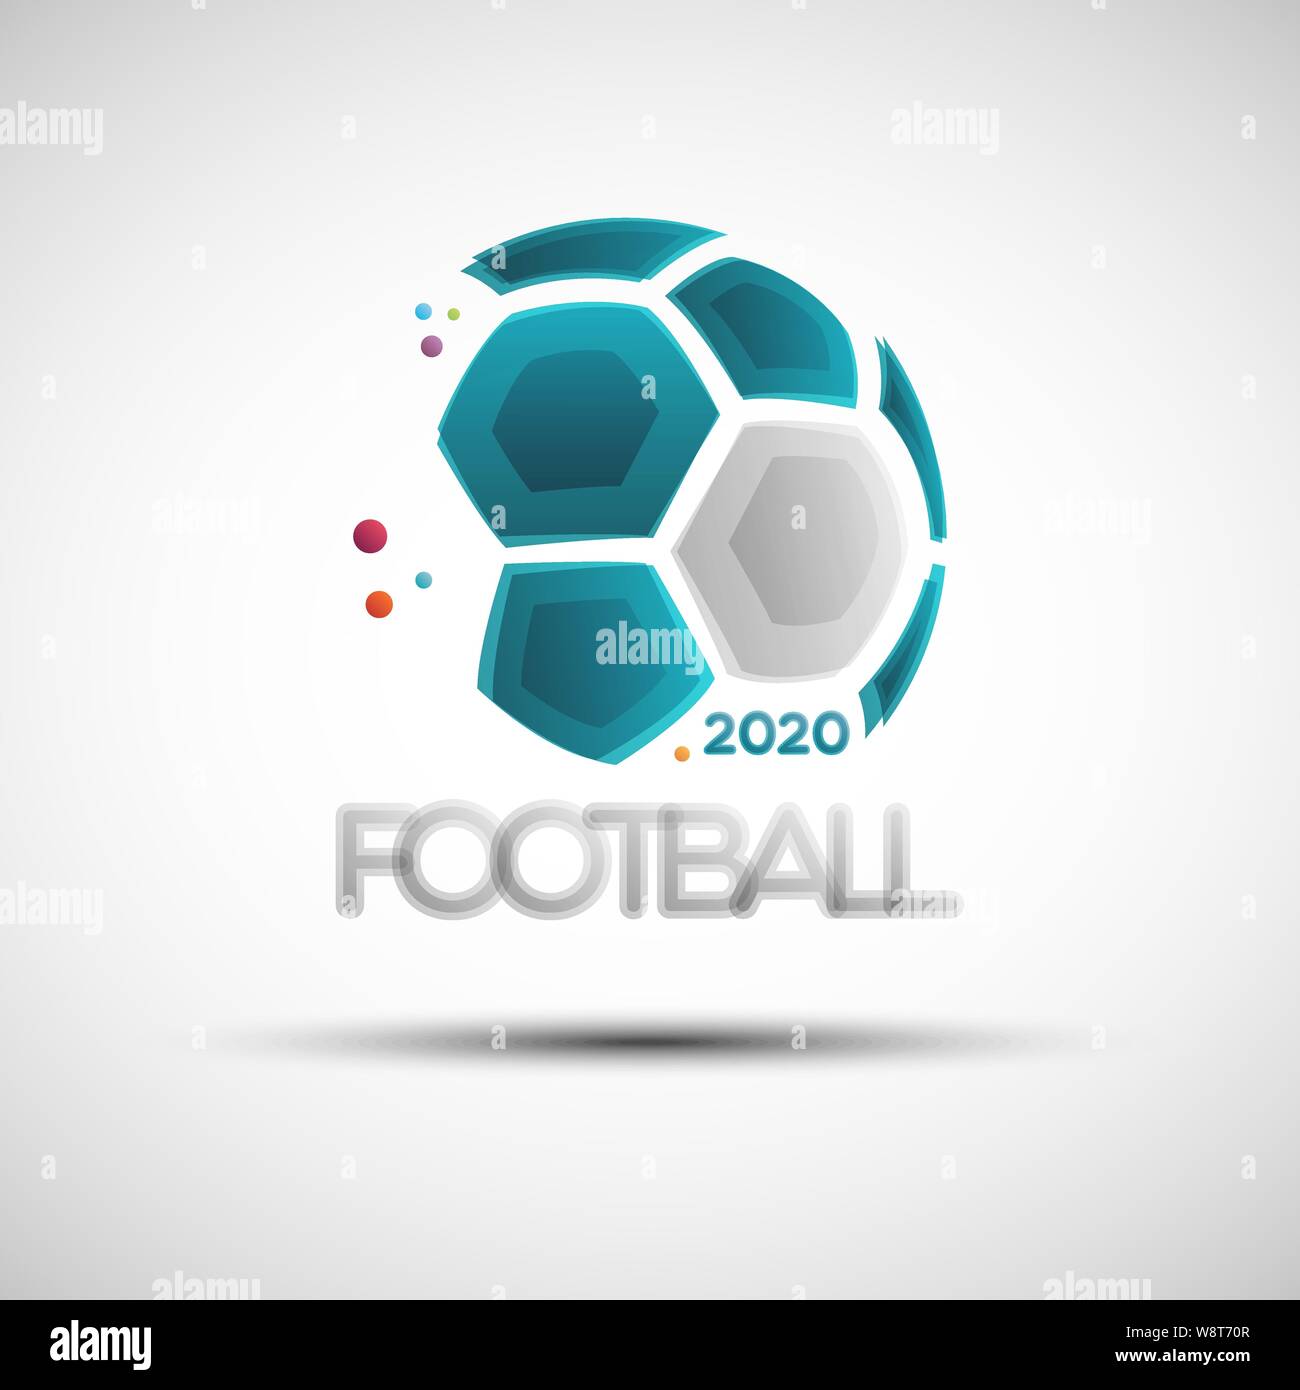 Football championship banner. Vector illustration of abstract soccer ball for your design Stock Vector